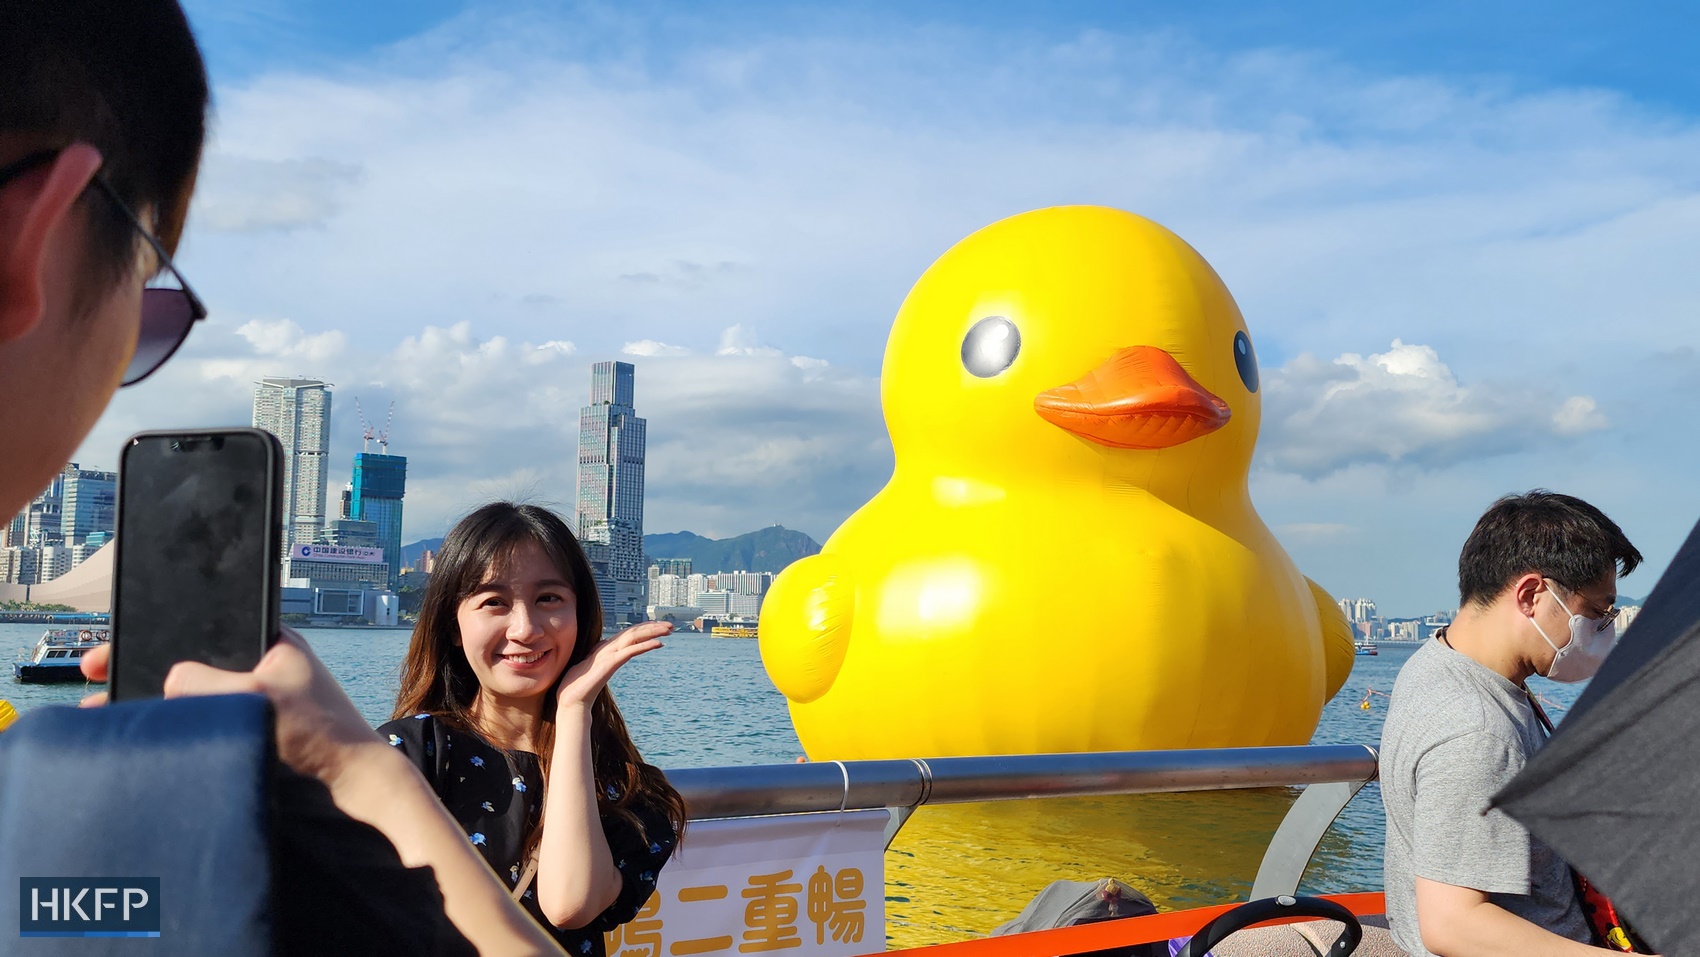 People take photos of a giant rubber duck by Dutch artist Florentijn Hofman in Hong Kong's Victoria Harbour, on June 10, 2023. Photo: Tom Grundy/HKFP.